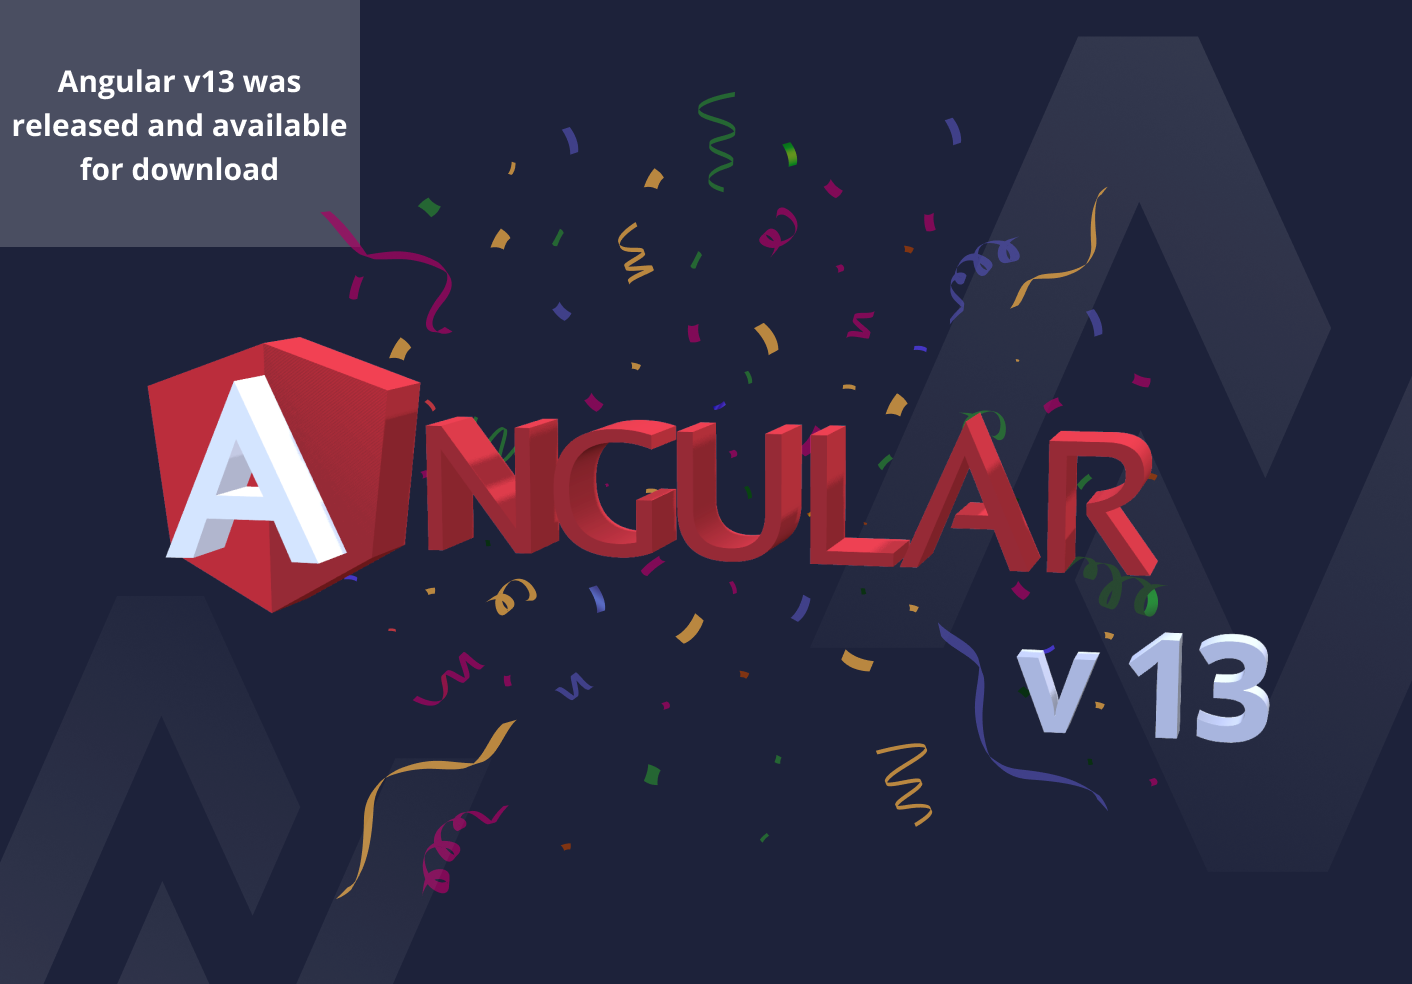 Angular v13 was released and available for download 